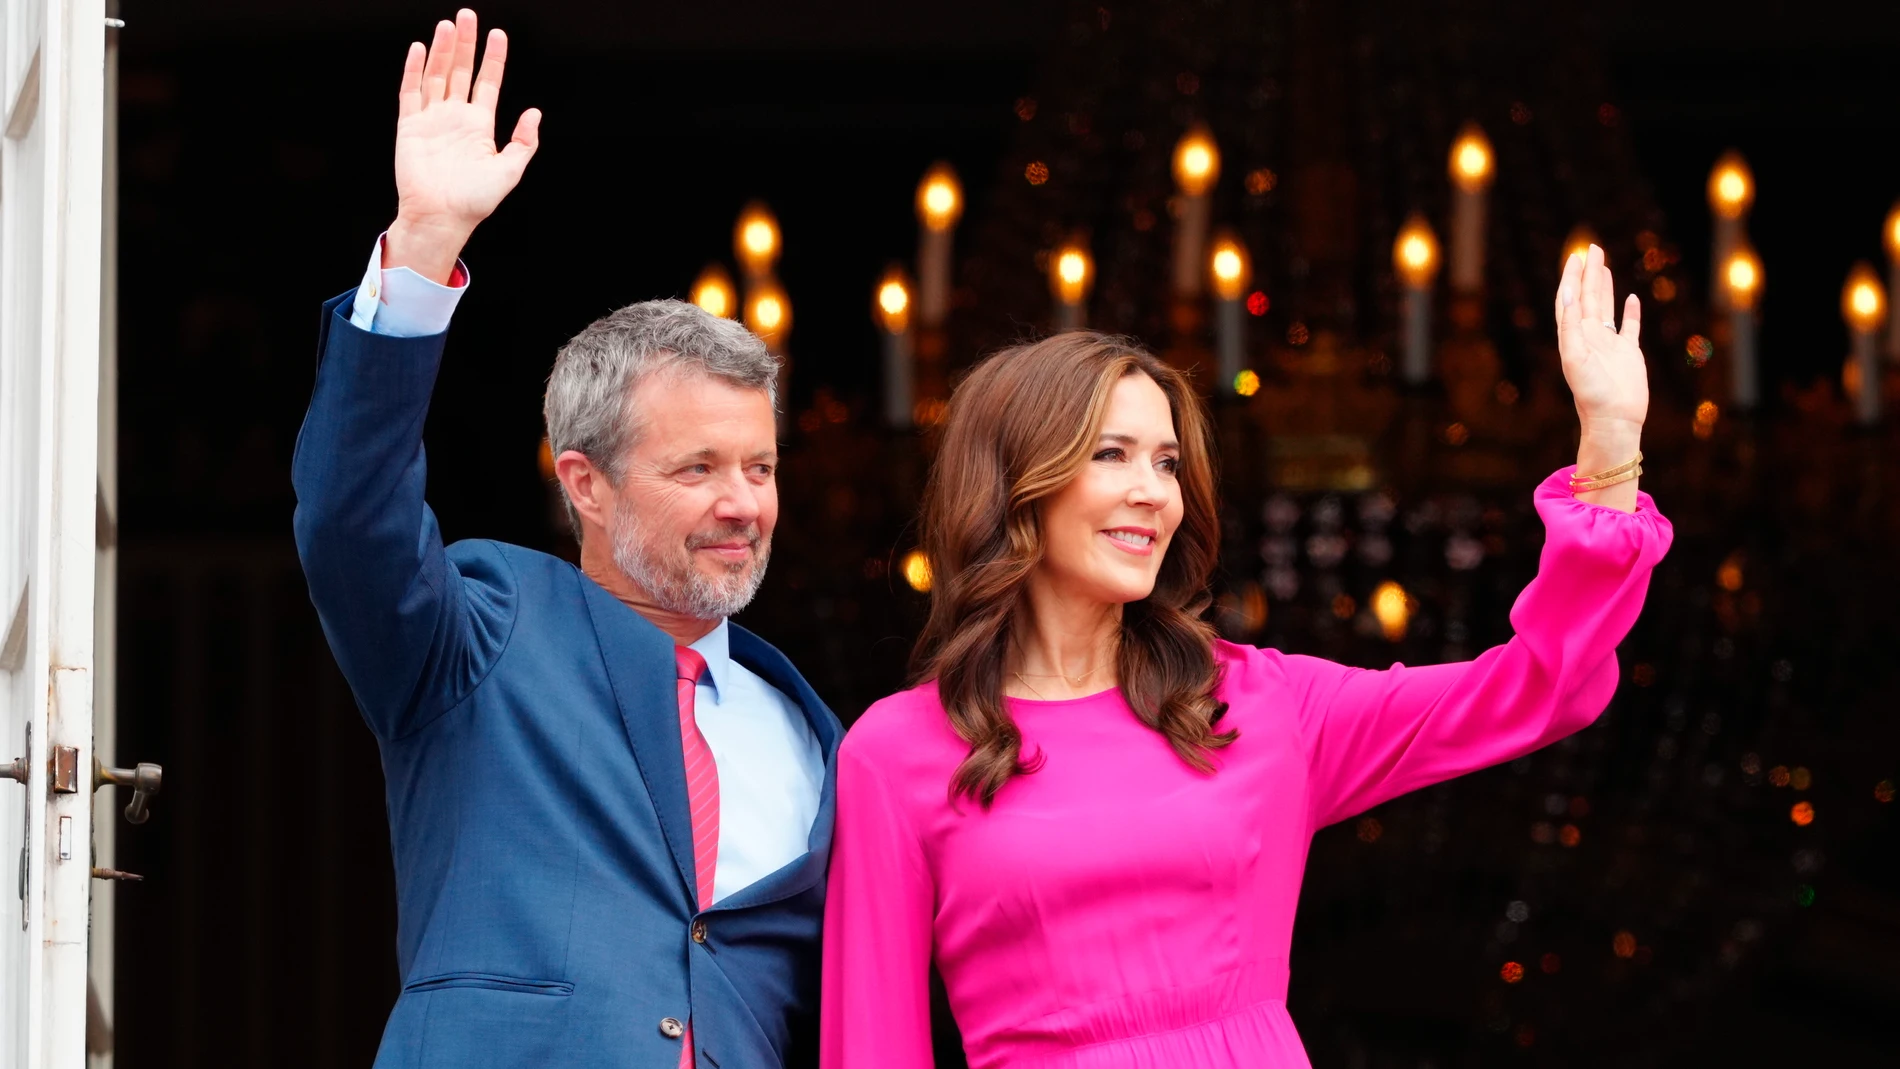 Denmark's King Frederik X, celebrating his 56th birthday, waves from the balcony with his wife Queen Mary at Frederik VIII's Palace, Amalienborg Castle in Copenhagen, Sunday, May 26, 2024. (Ida Marie Odgaard/Ritzau Scanpix via AP)